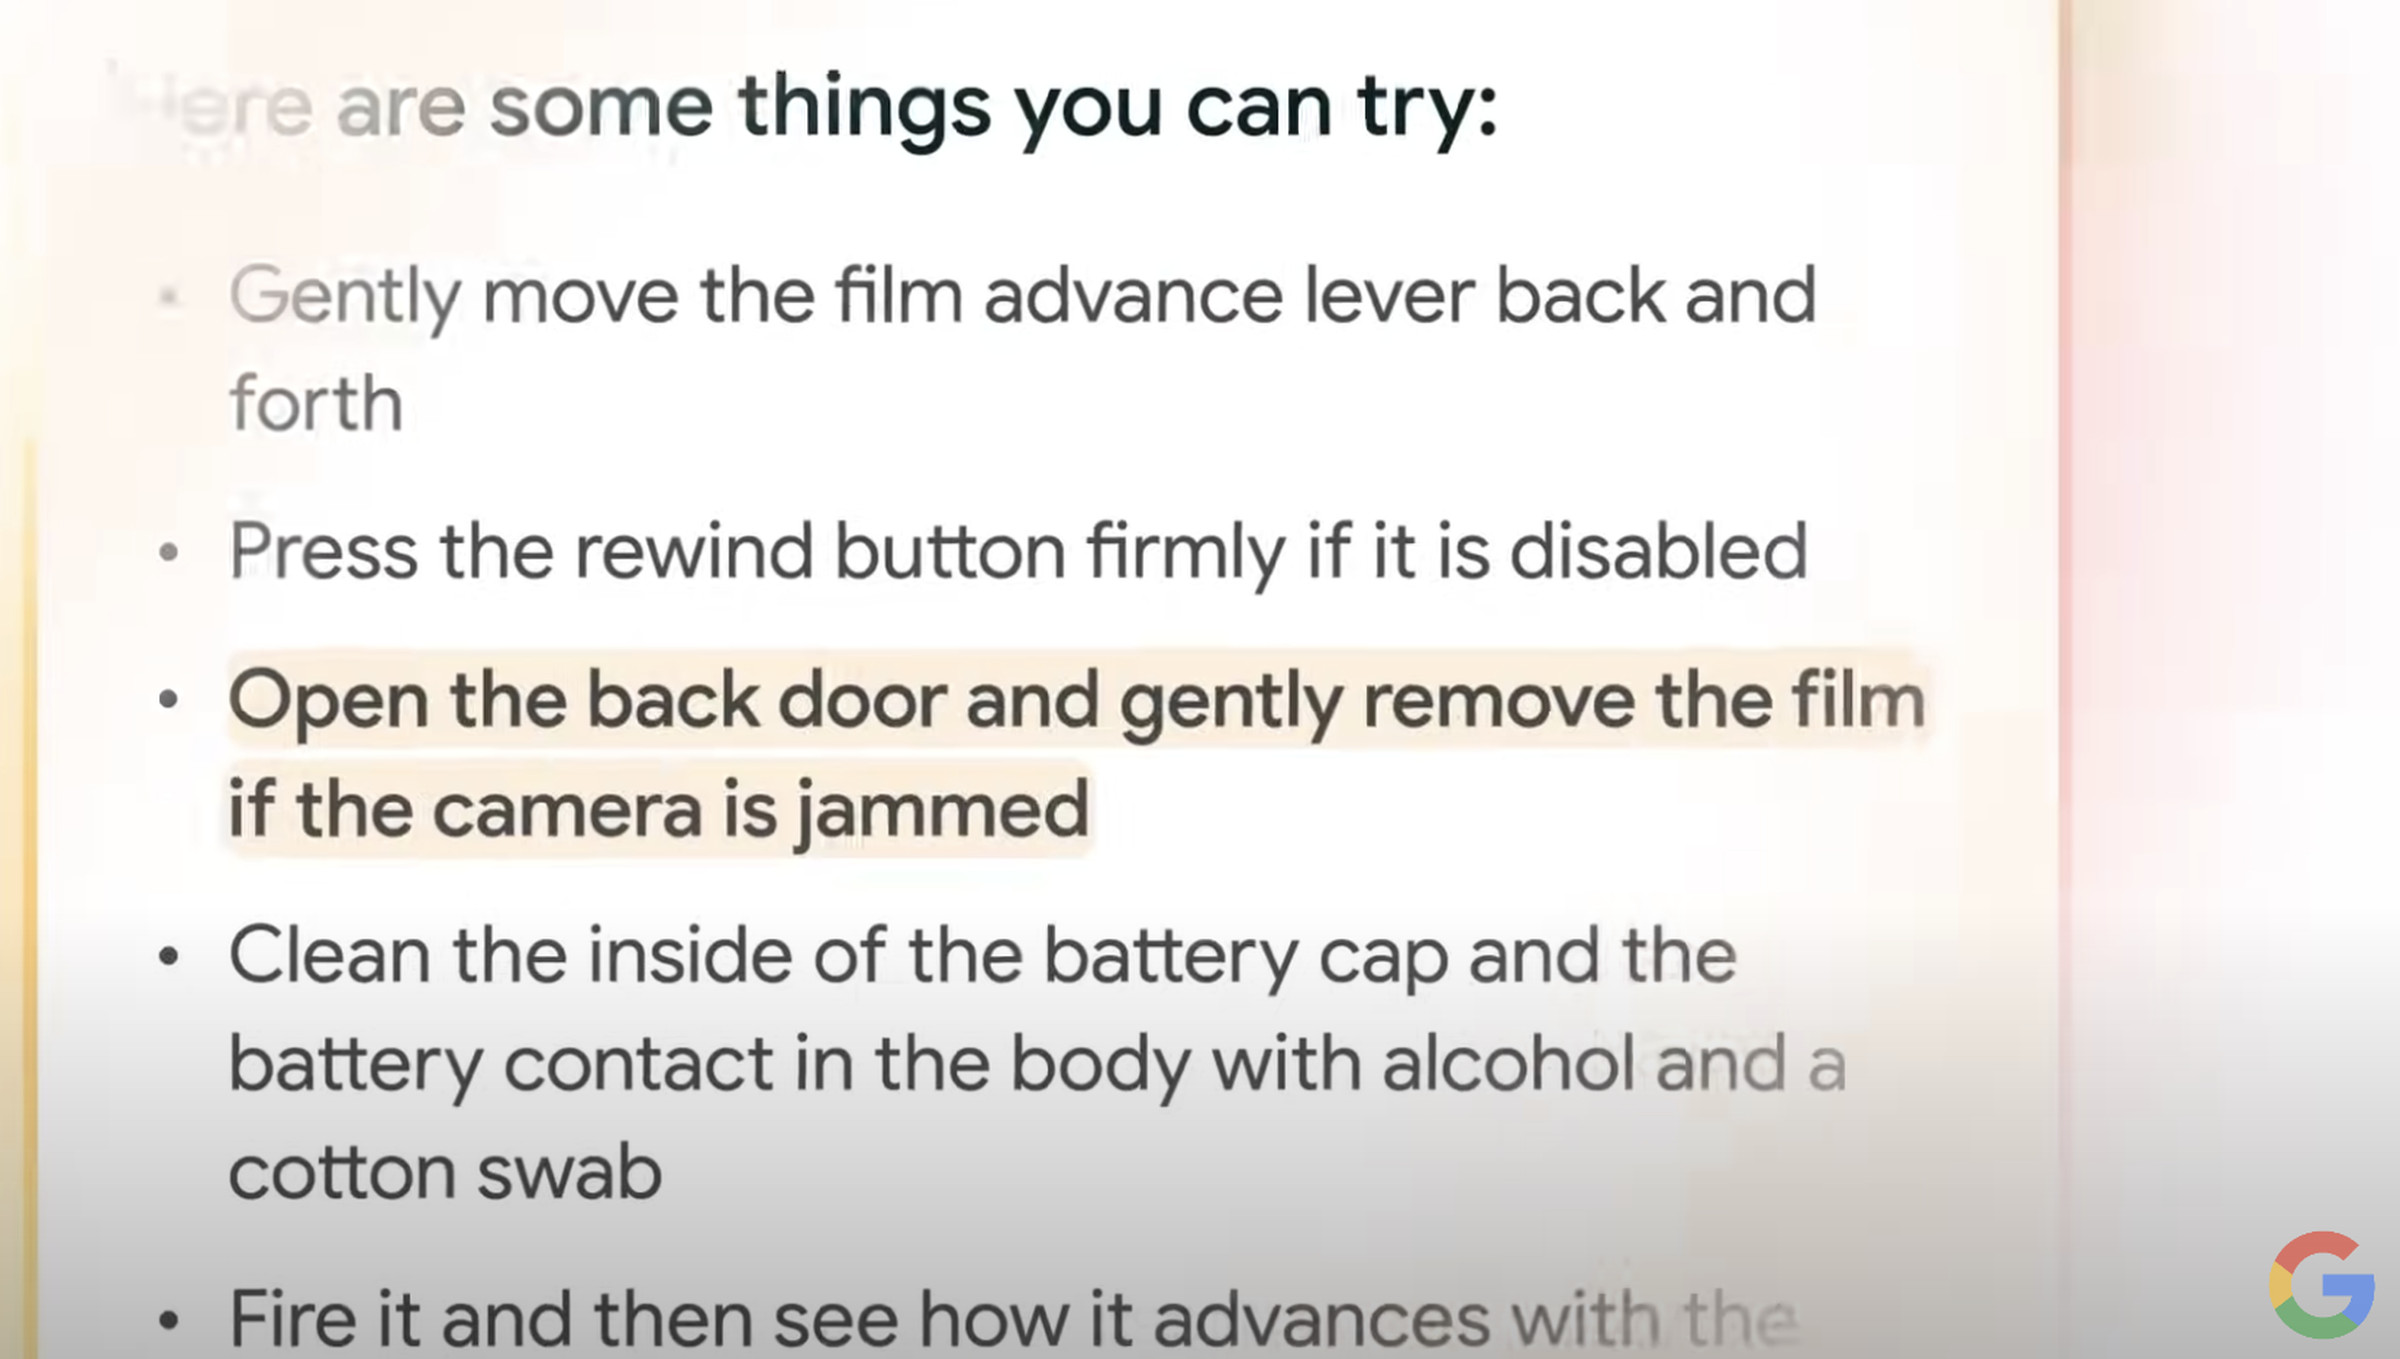 Google highlighting the worst thing you can do with a film camera in a video for Gemini search